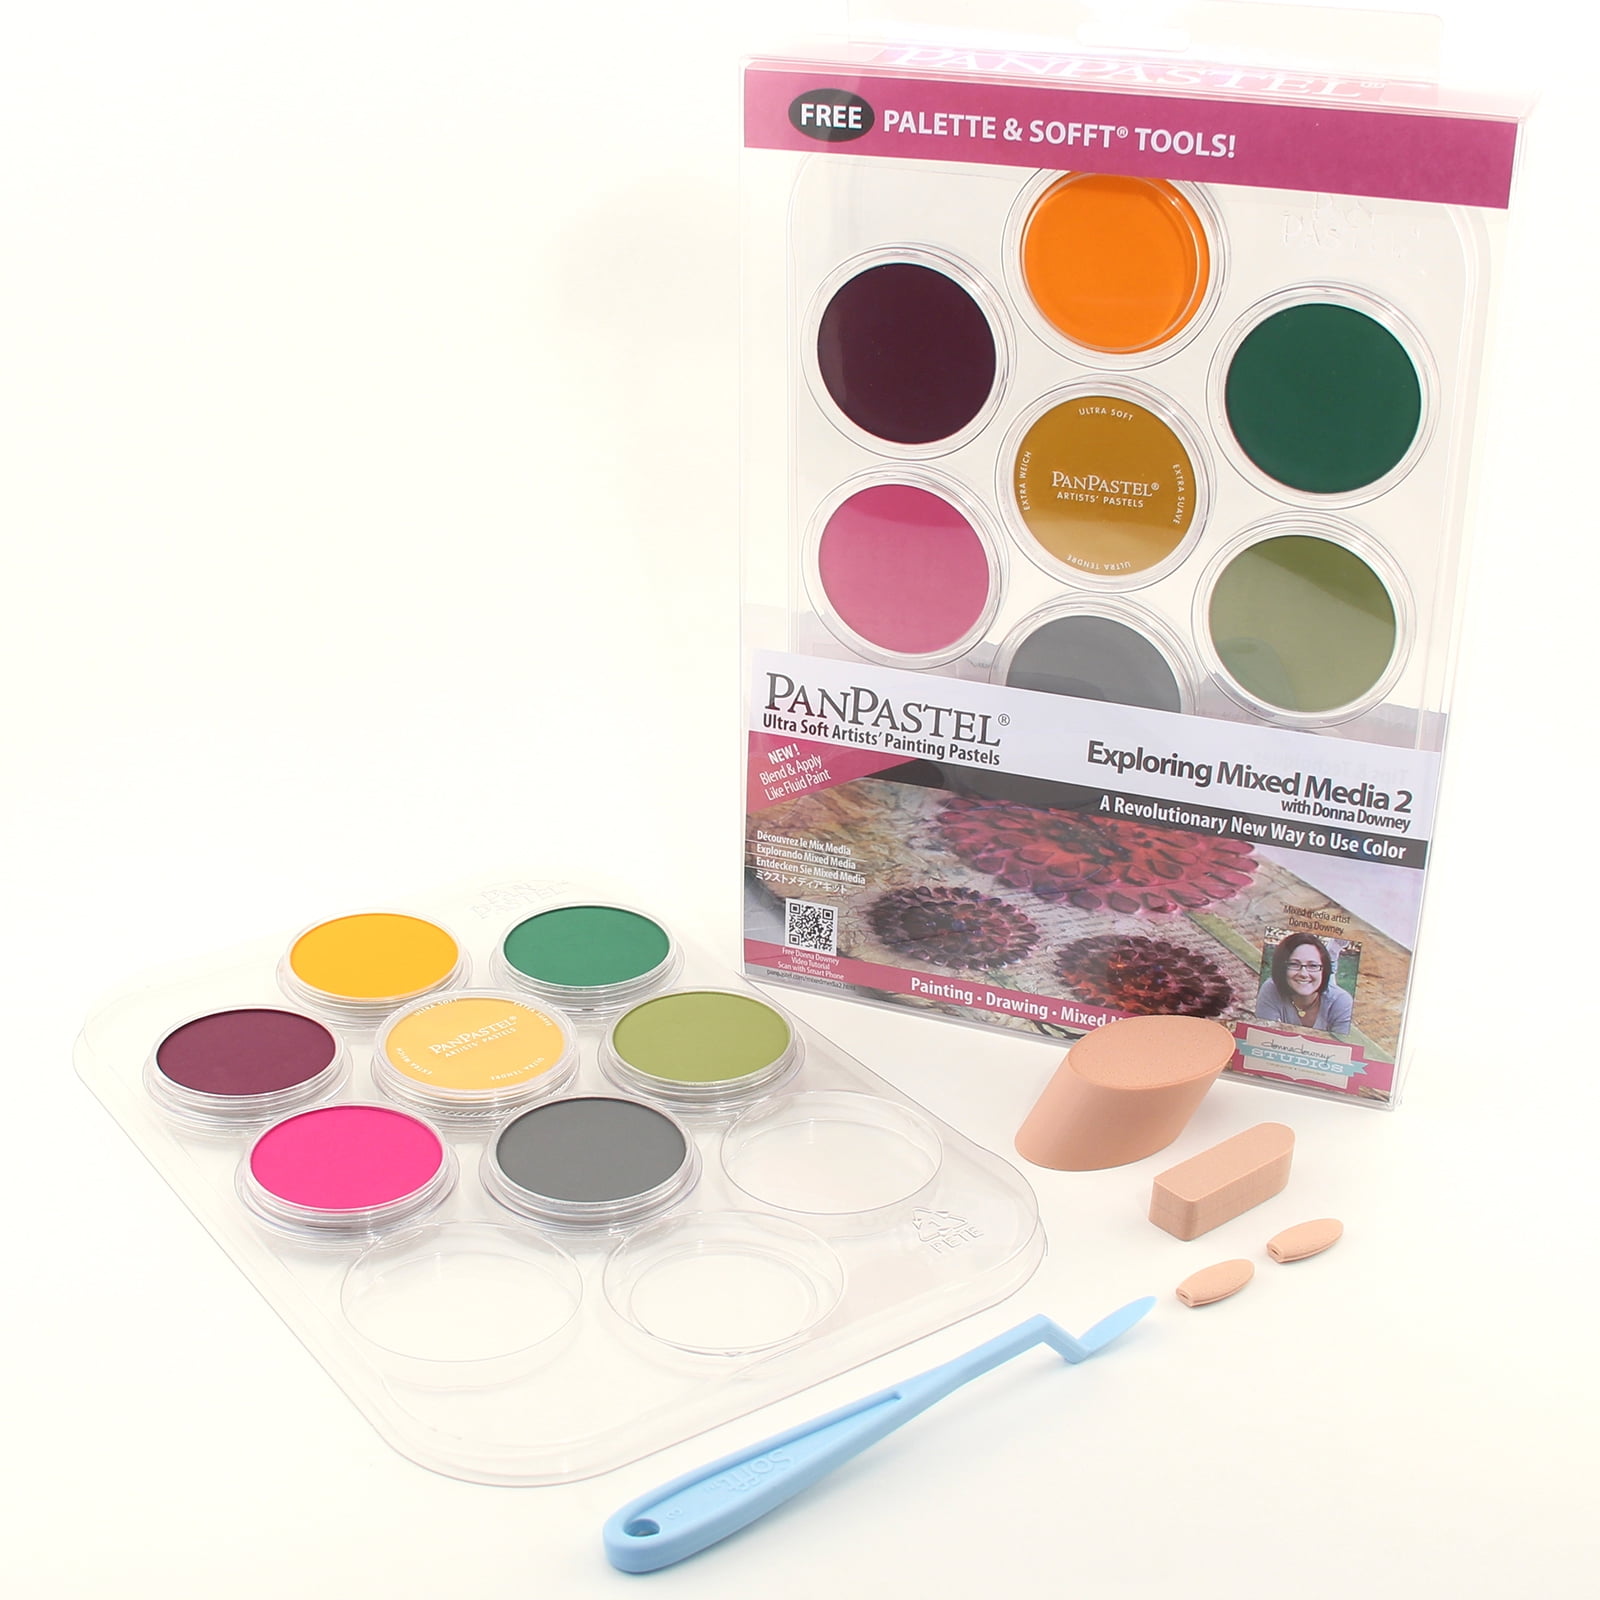 PanPastel- Ultra Soft Artists' Painting Pastels, For Painting, Drawing &  Mixed Media